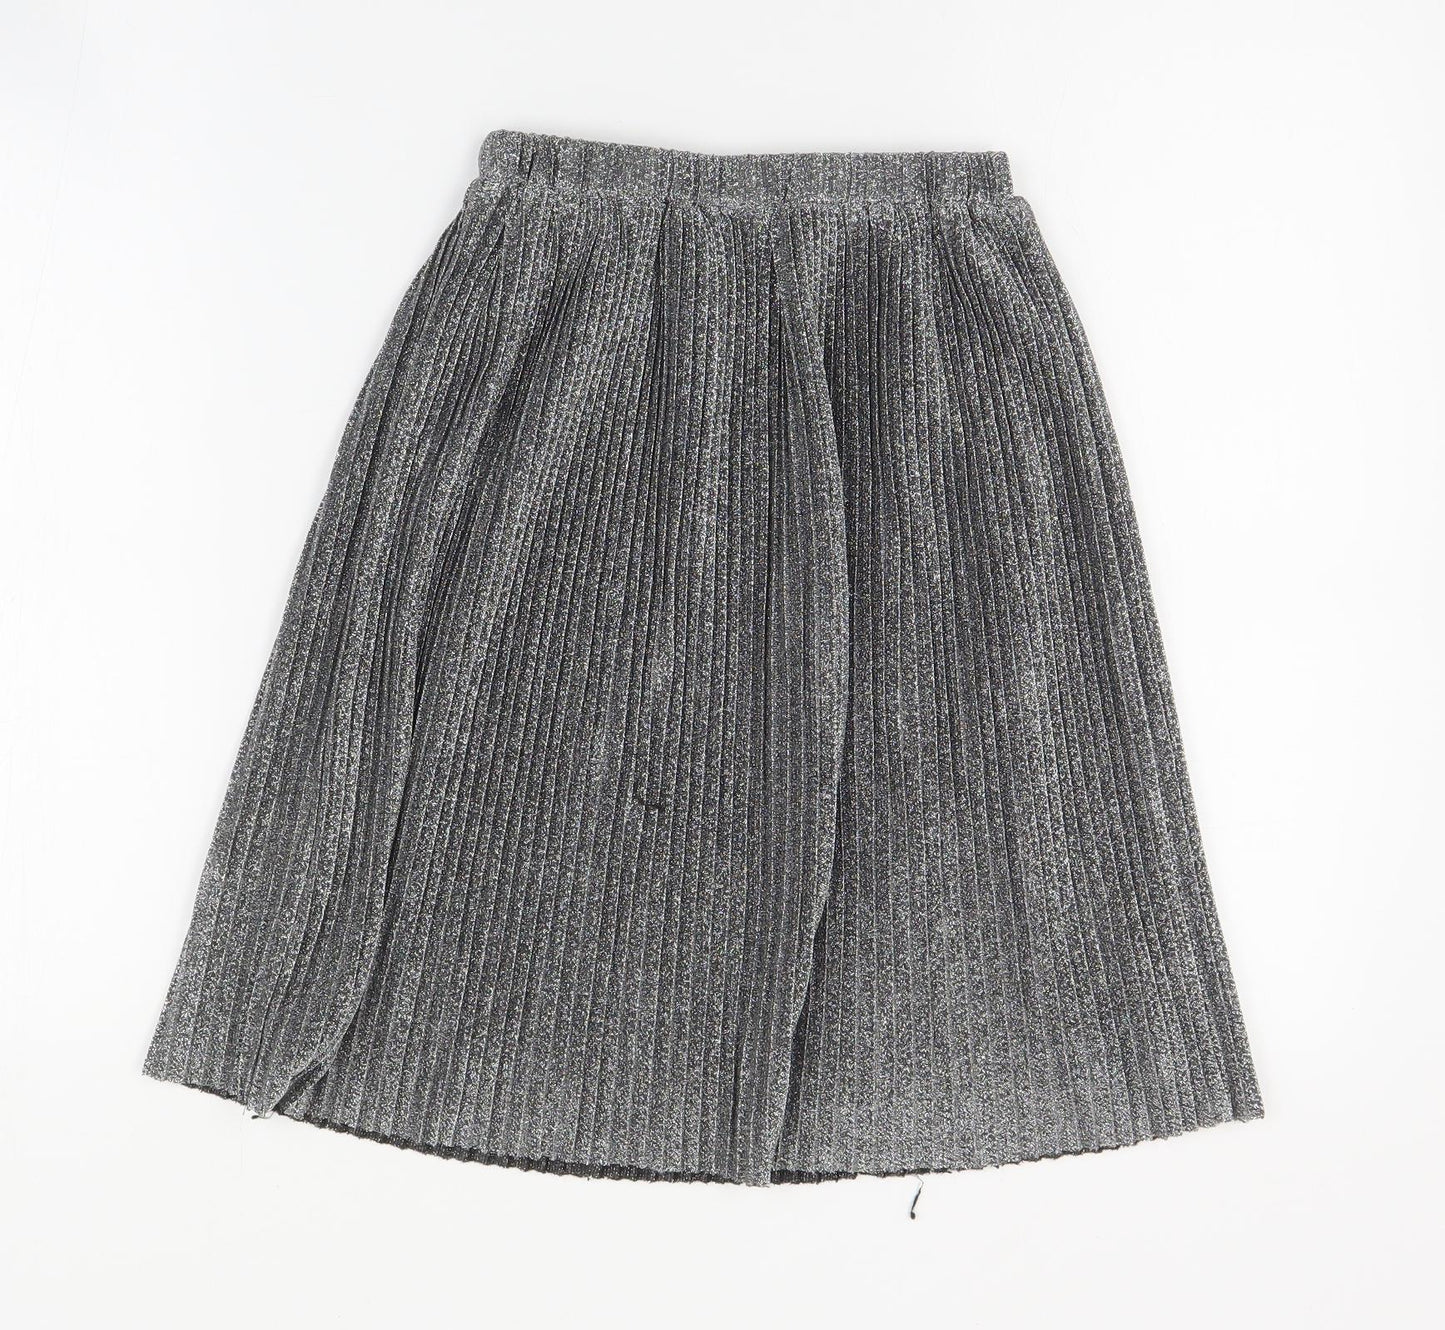 Leigh Tucker Girls Silver  Polyester Pleated Skirt Size 6-7 Years  Regular Pull On